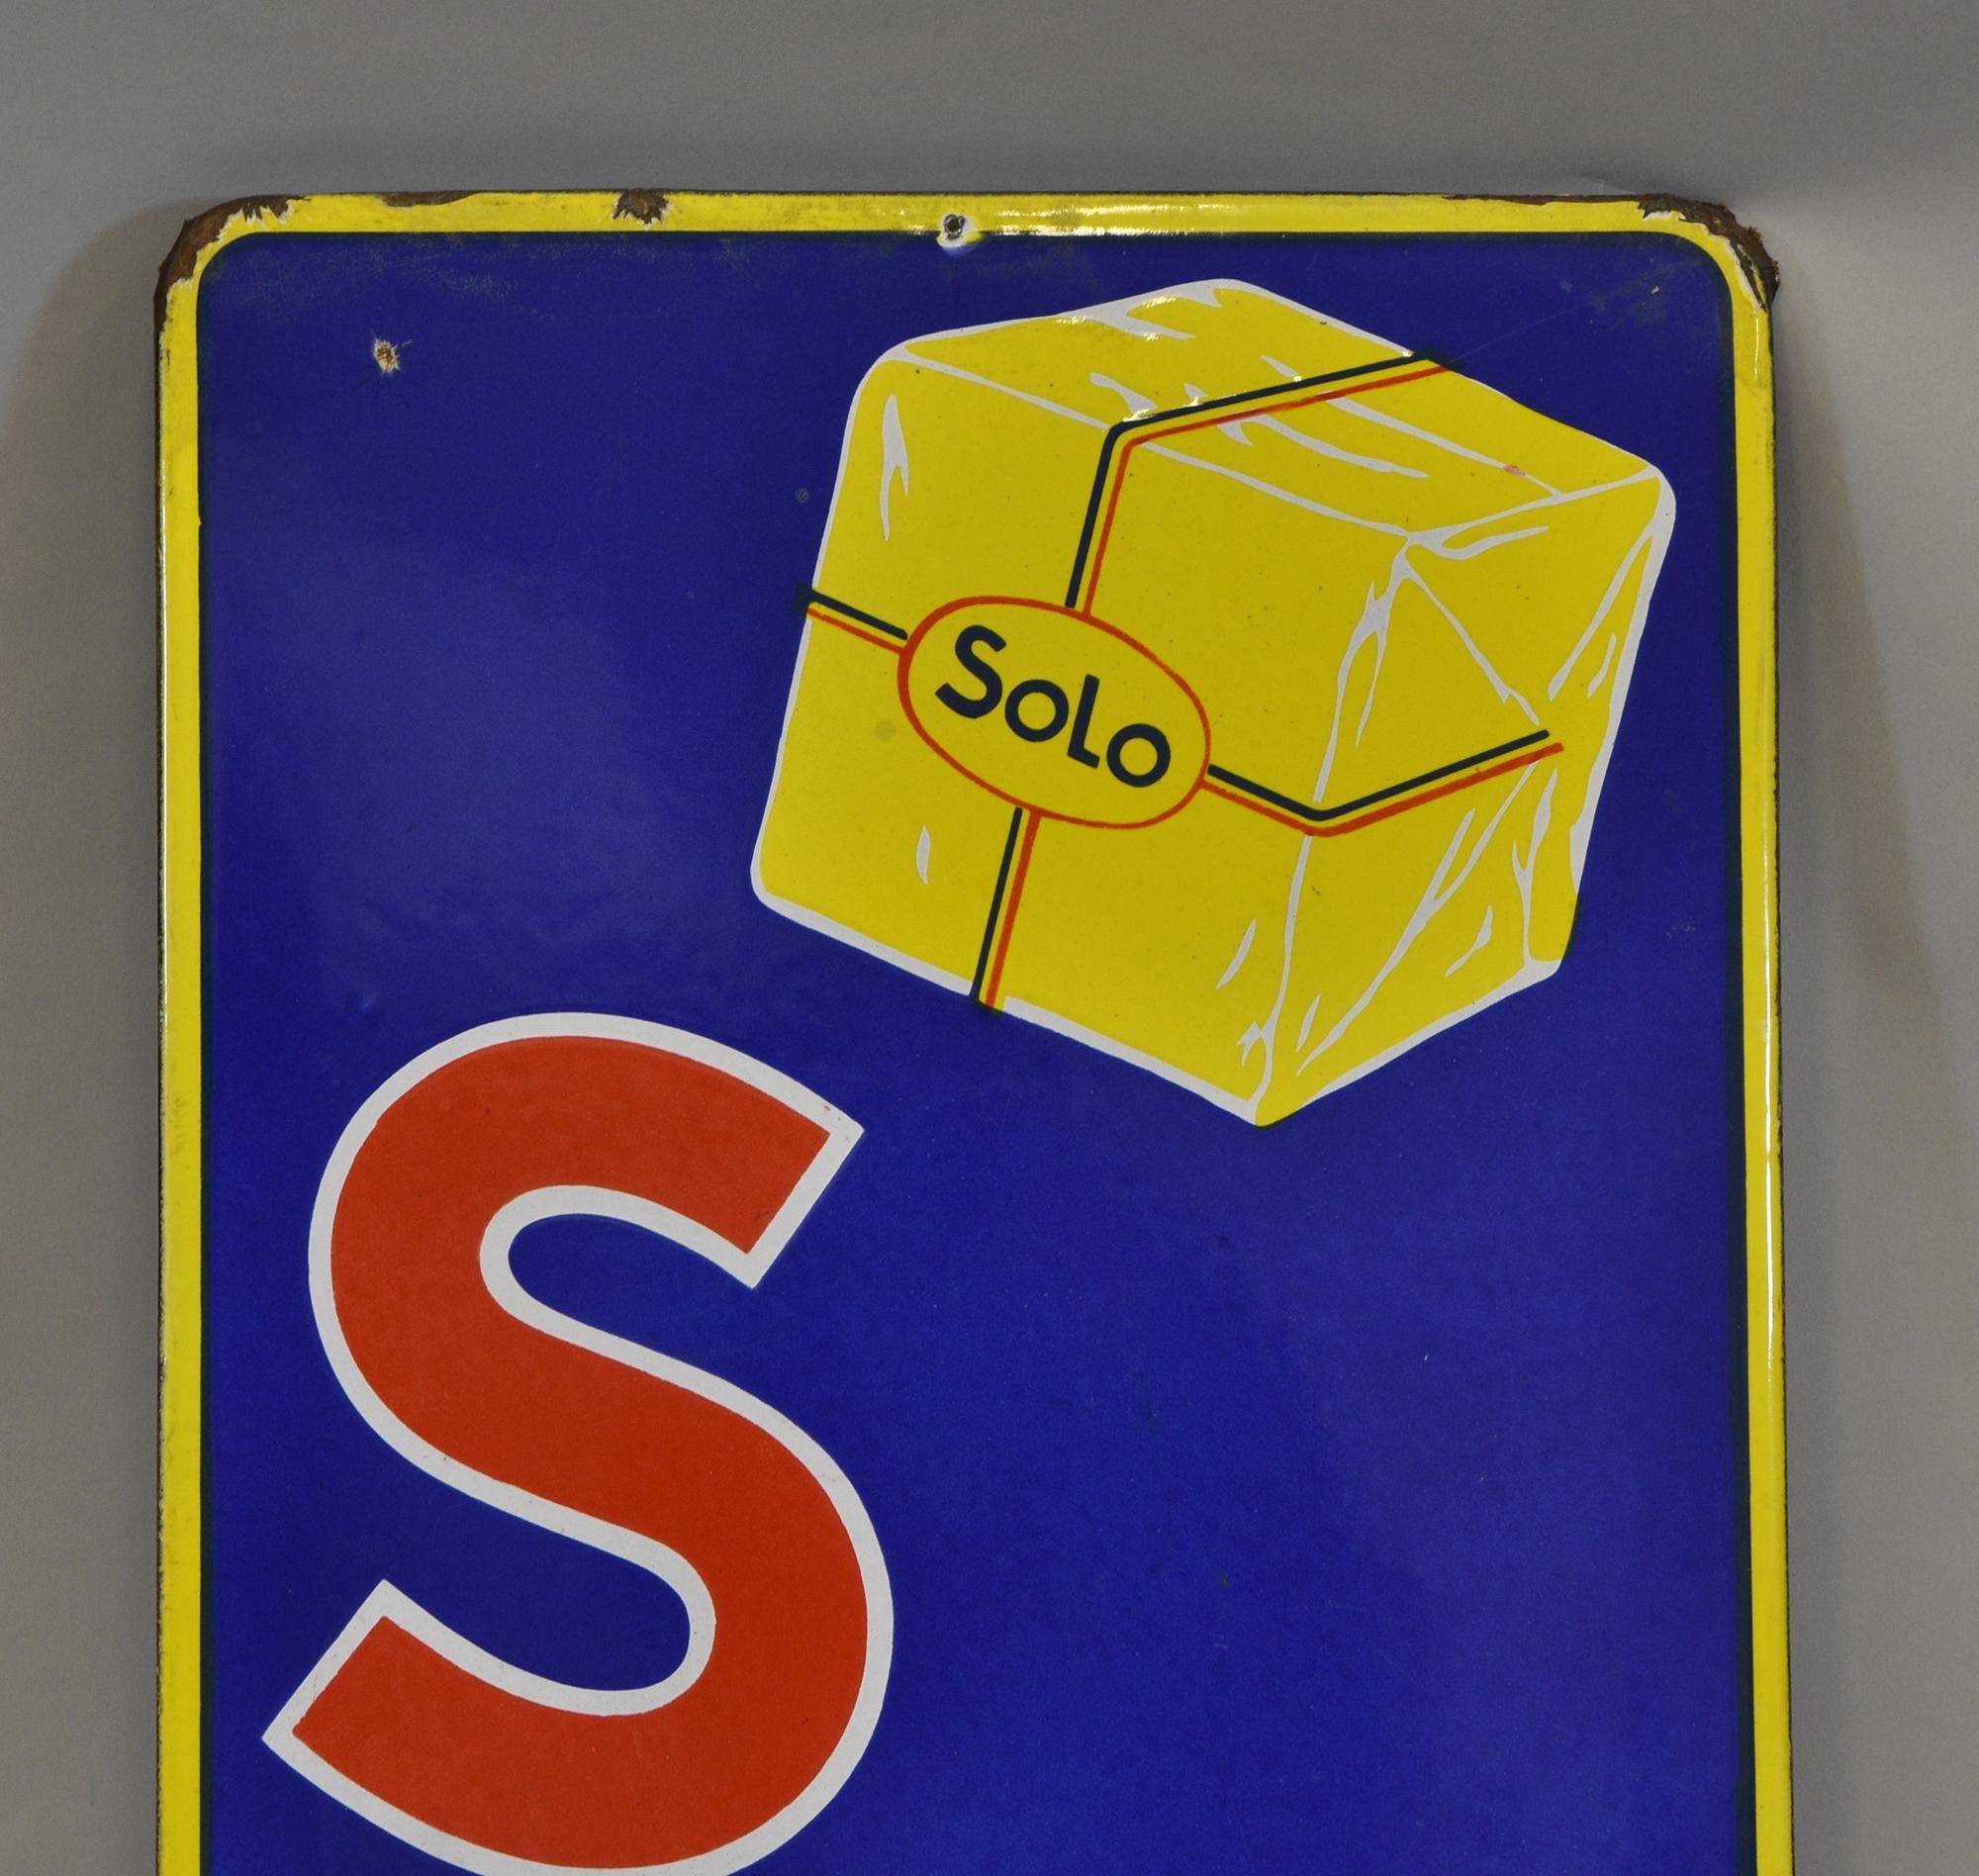 A wonderful bright vintage enamel sign advertising Solo margarine. Belgian - Circa 1940's.

The sign is in very good condition for its age, there is some wear to the edging in places, and some holes to the bottom right, please refer to the